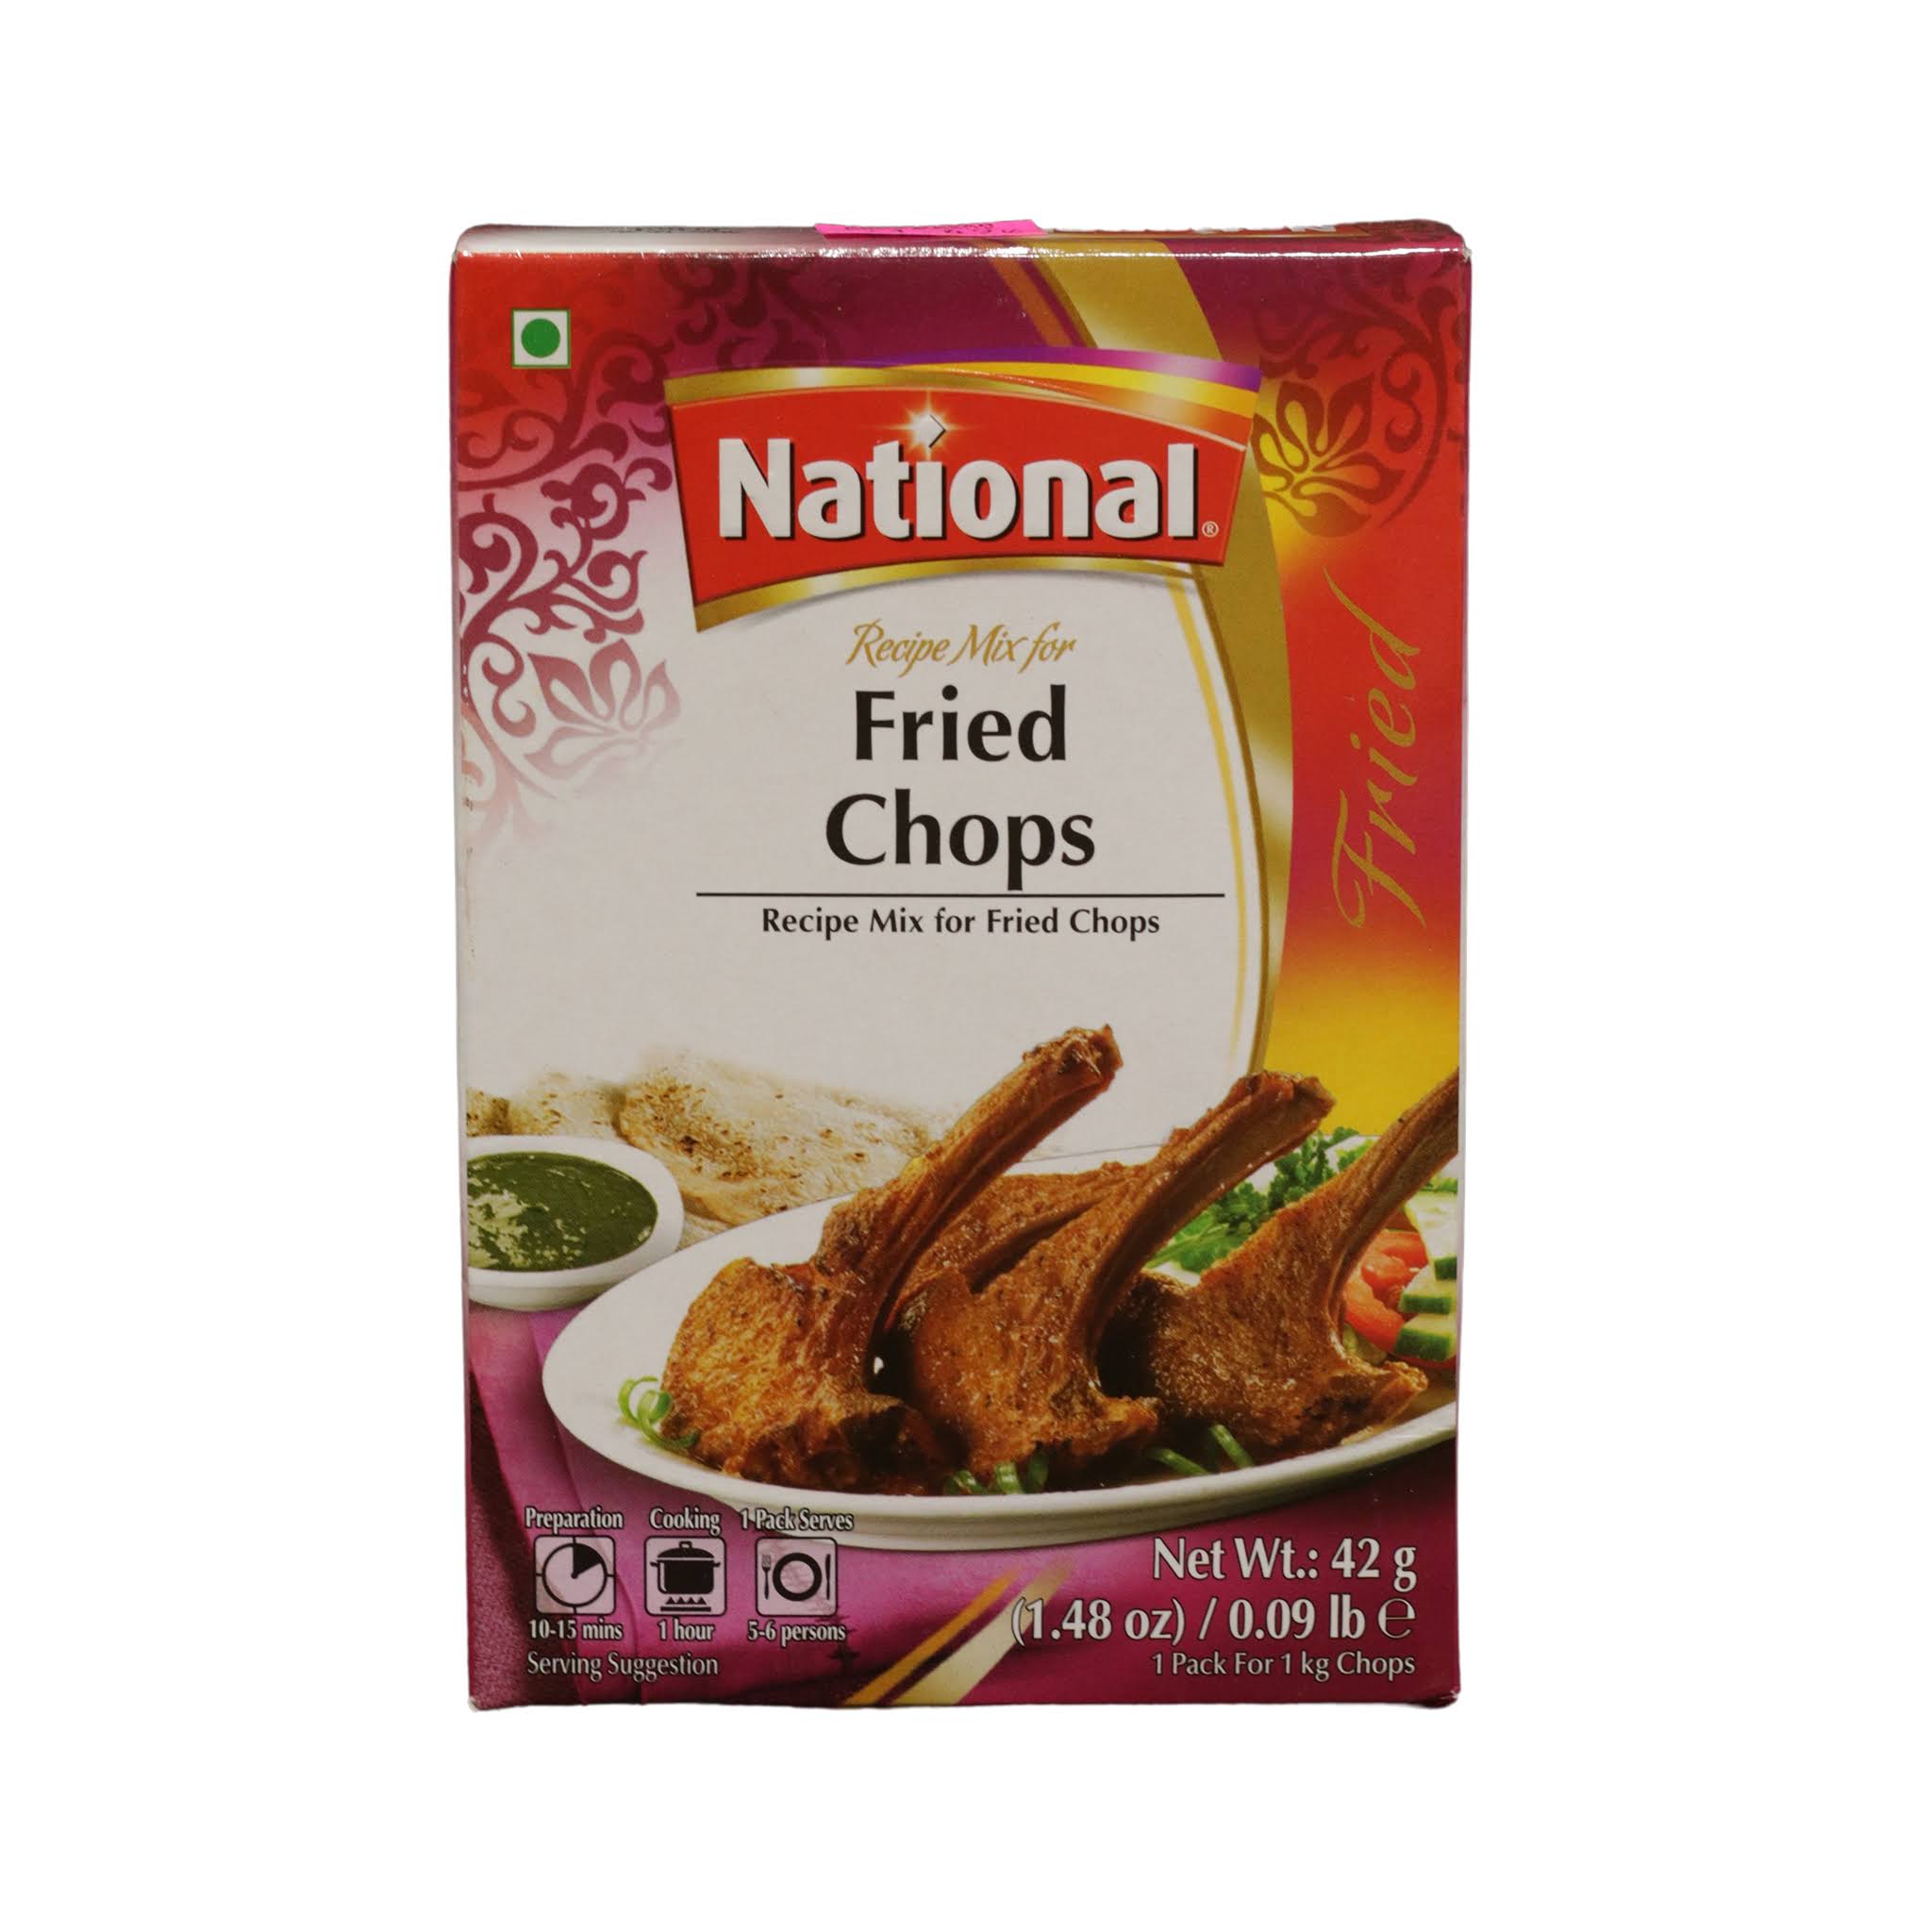 National Foods Fried Chops Recipe Mix 1.48 oz (42g) | South Asian BBQ Masala Powder | Traditional Spicy Chicken | BBQ Seasoning | Box Pack